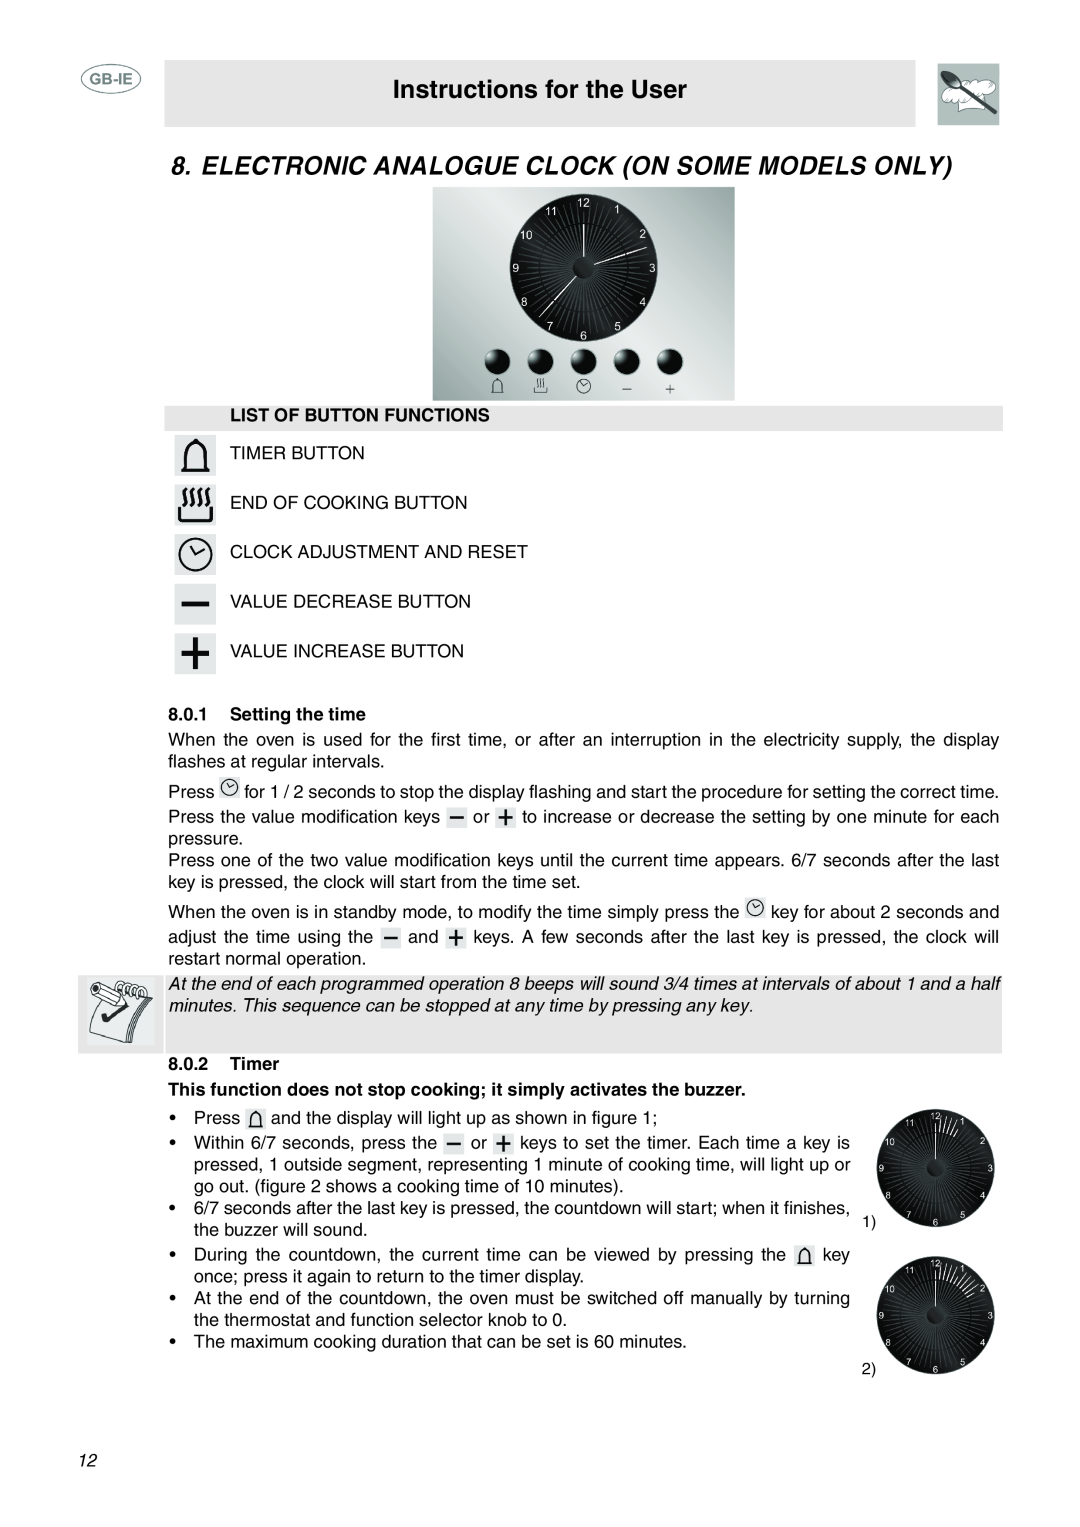 Smeg SCA130P Electronic Analogue Clock On Some Models Only, Instructions for the User, List Of Button Functions, Timer 